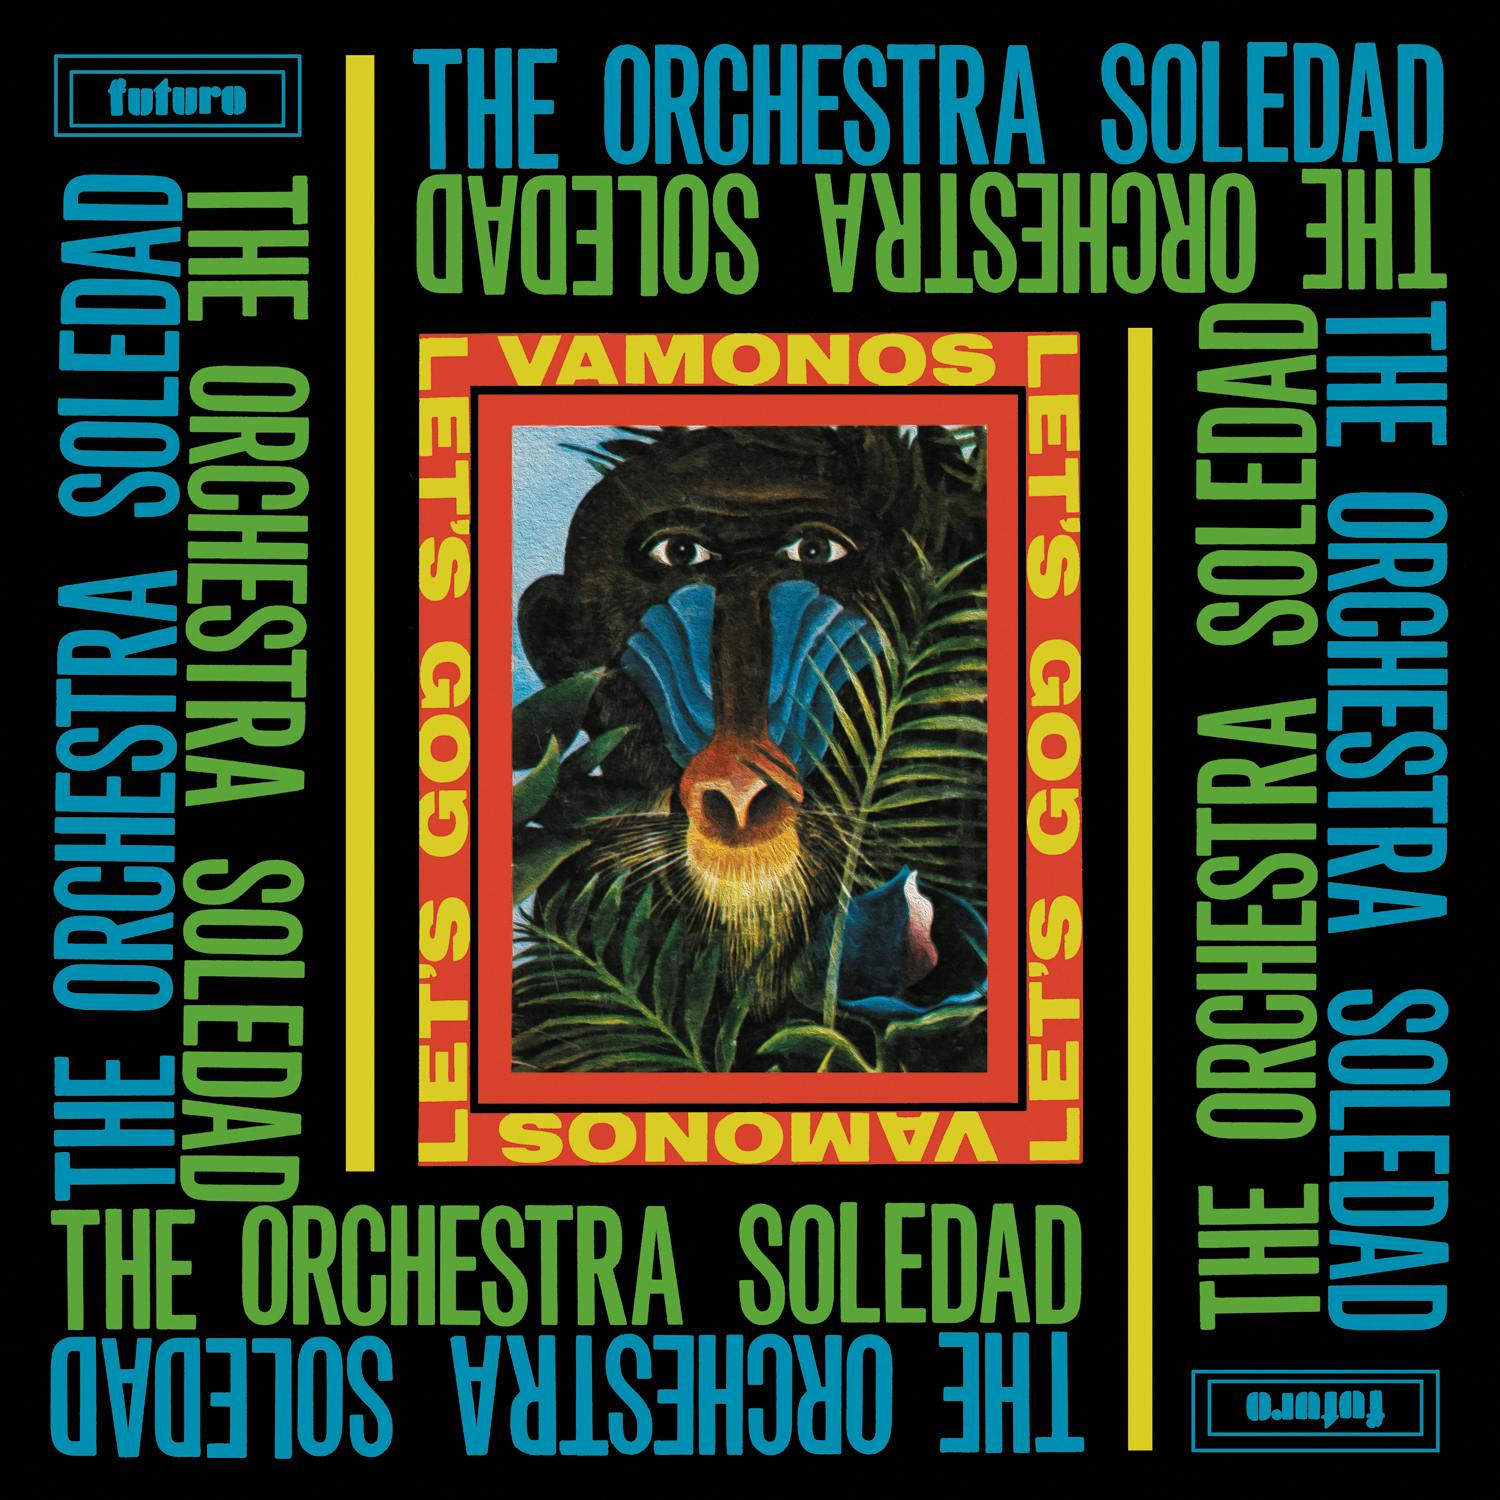 Originally released in 1970 by Chicago imprint Futuro, 'Vamonos / Let's Go!' is a vinyl LP recorded by Brooklyn salsa band 'The Orchestra Soledad'.